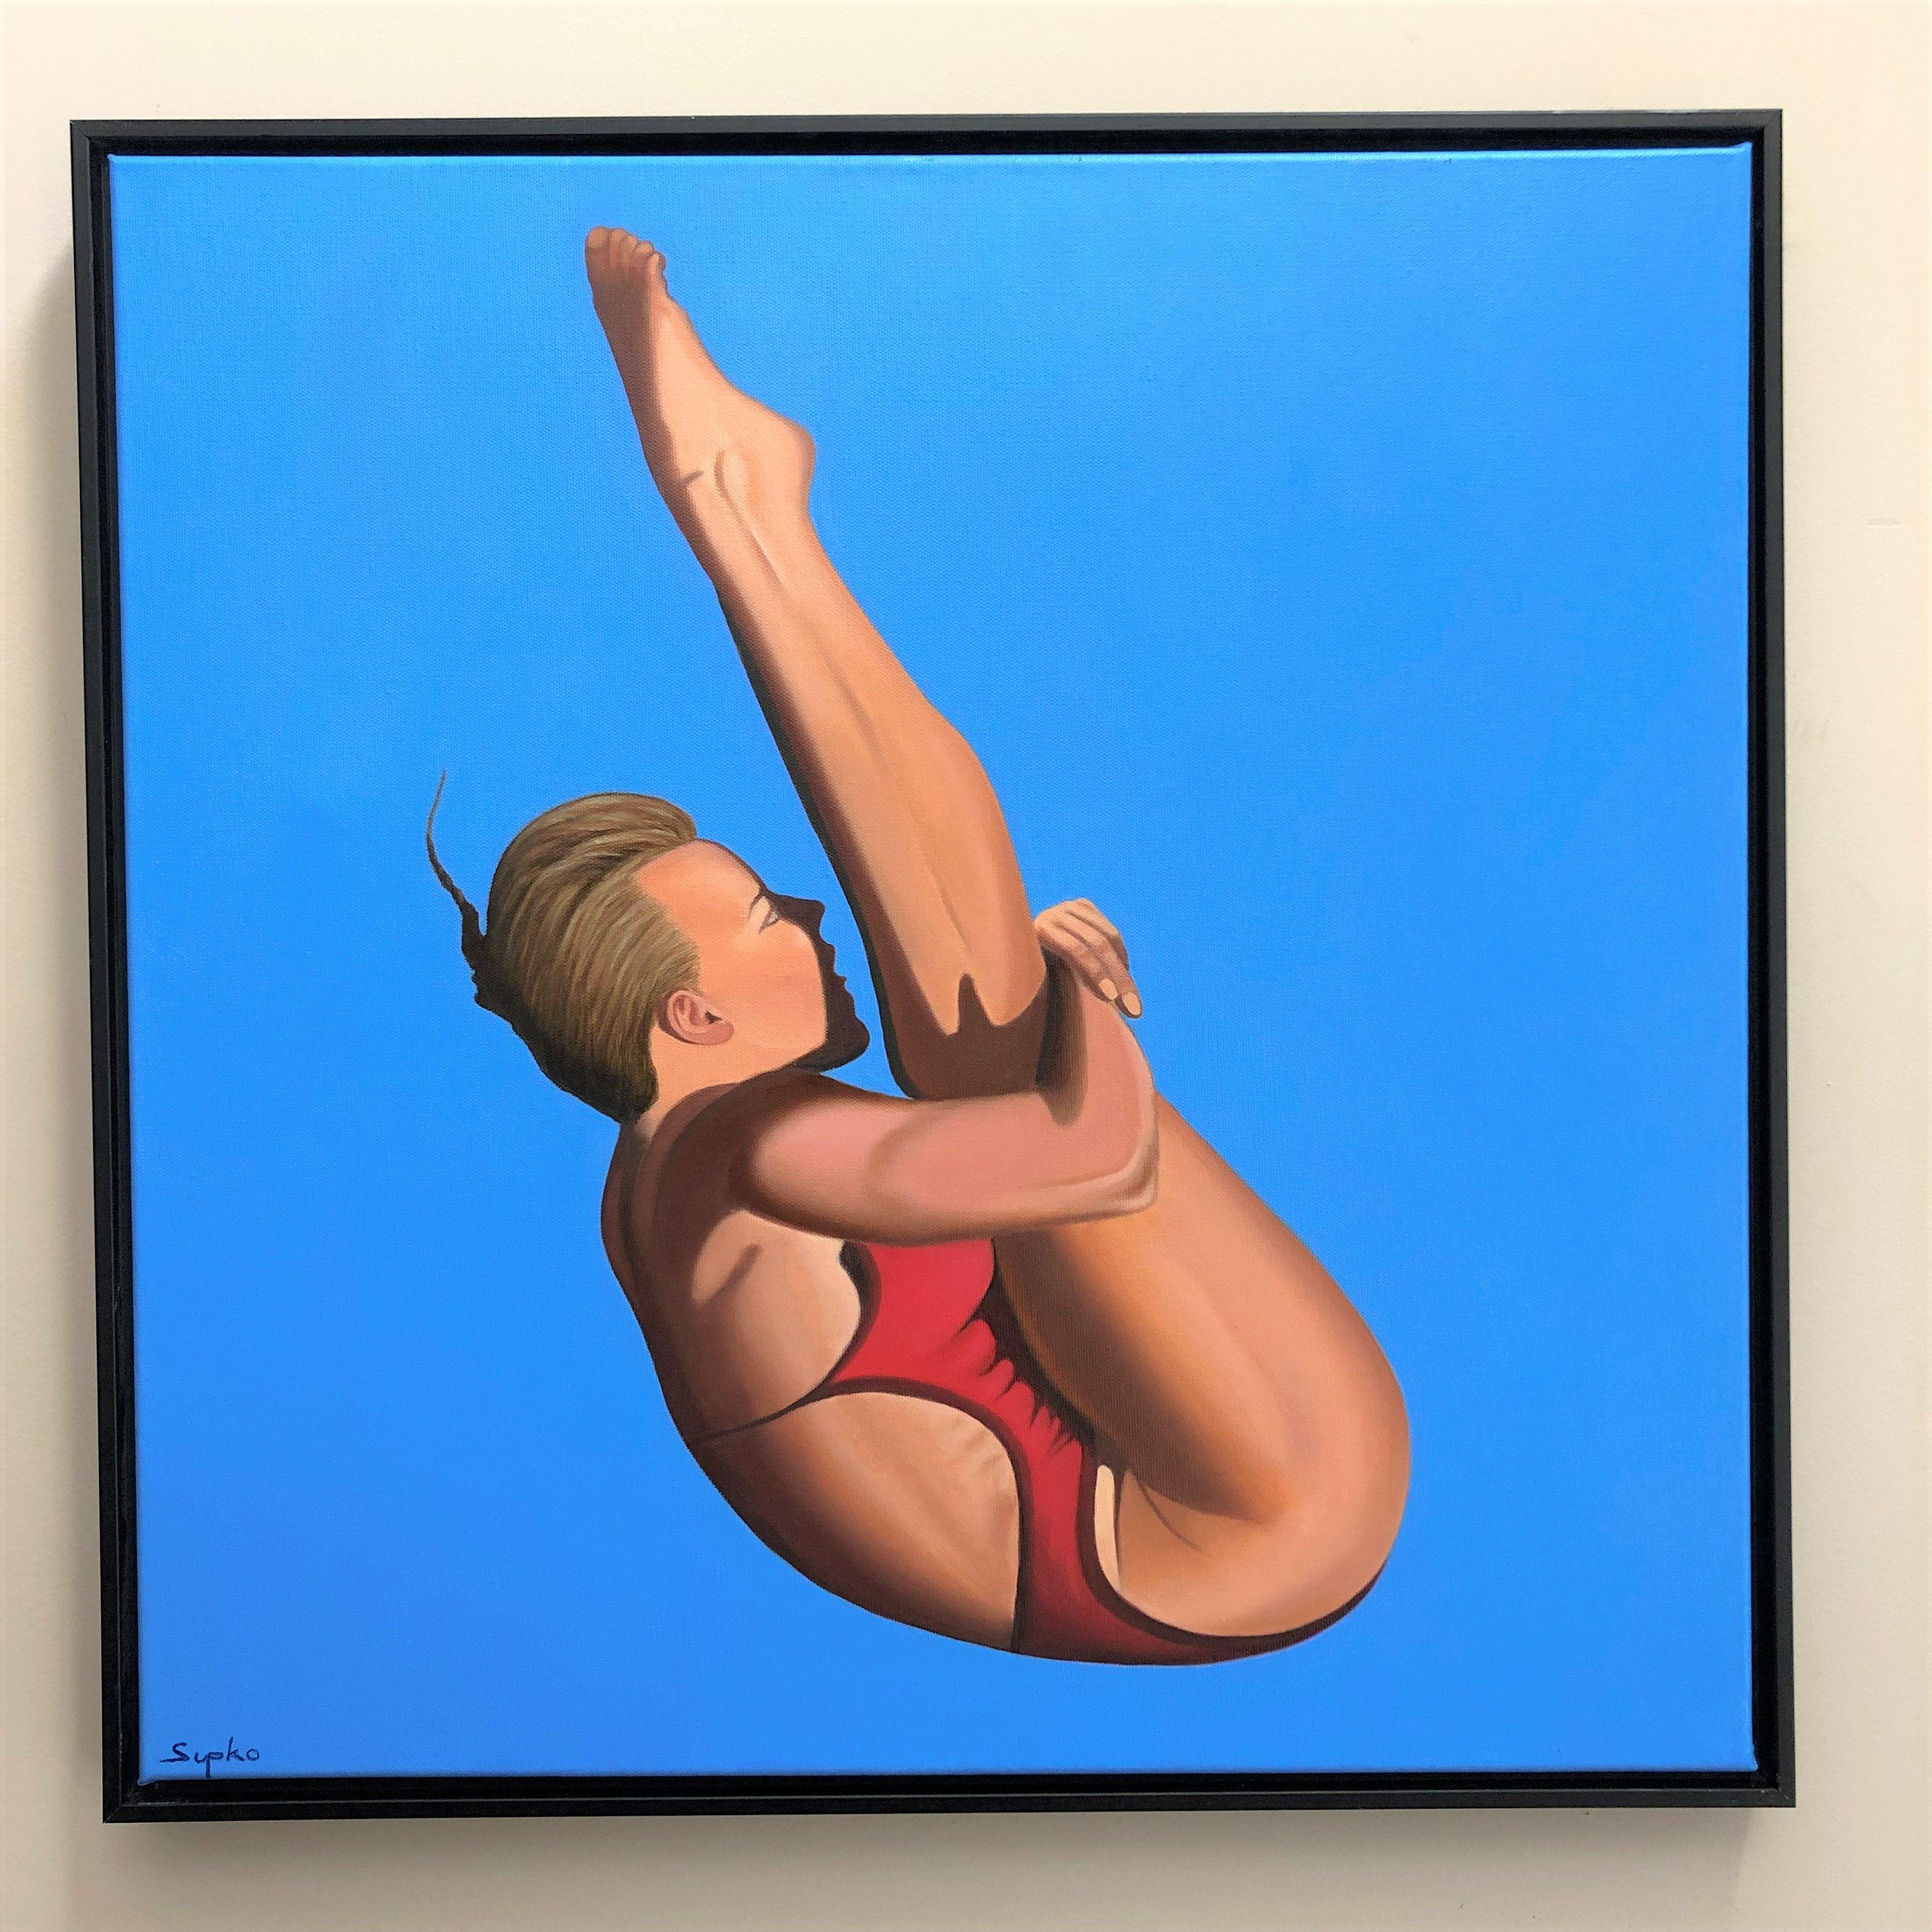 I spend a lot of time in the summer near the pool and there is a never ending amount of painting ideas around or neat the pool.  This painting is a figurative piece with a diving theme.  It was a very challenging piece getting the drawing nailed